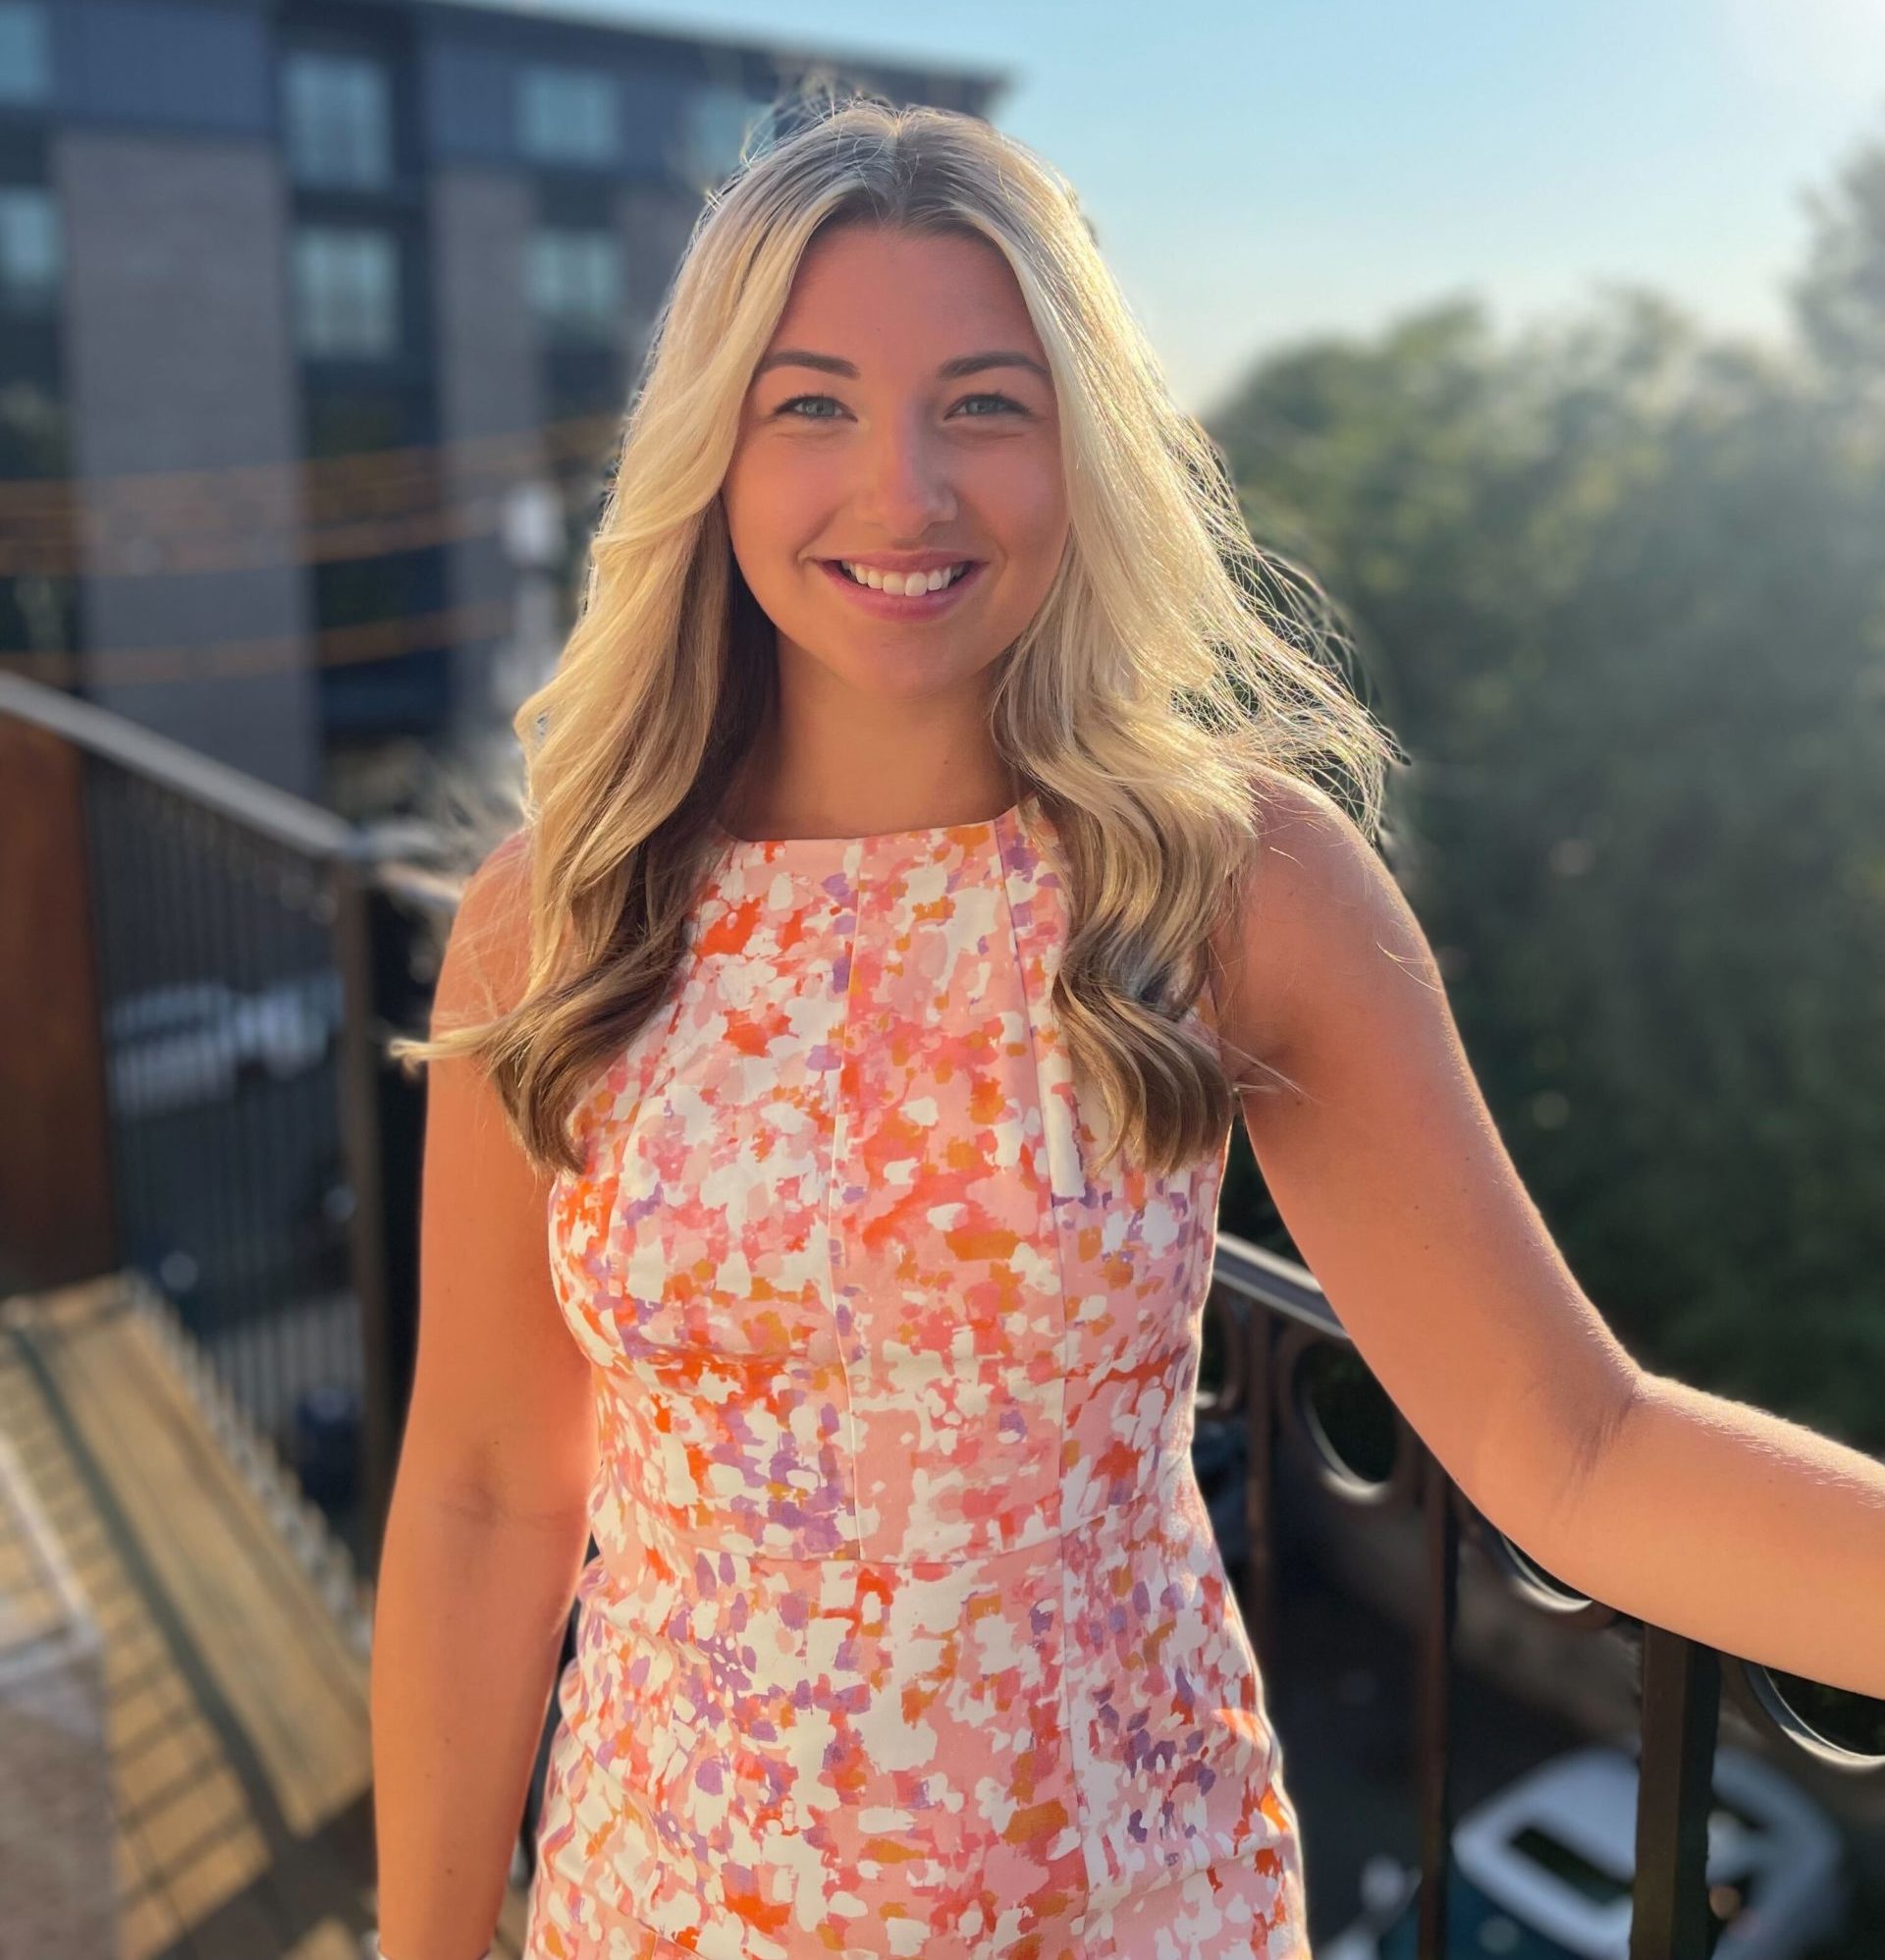 Erin Jones standing on a balcony with the sun glistening behind her